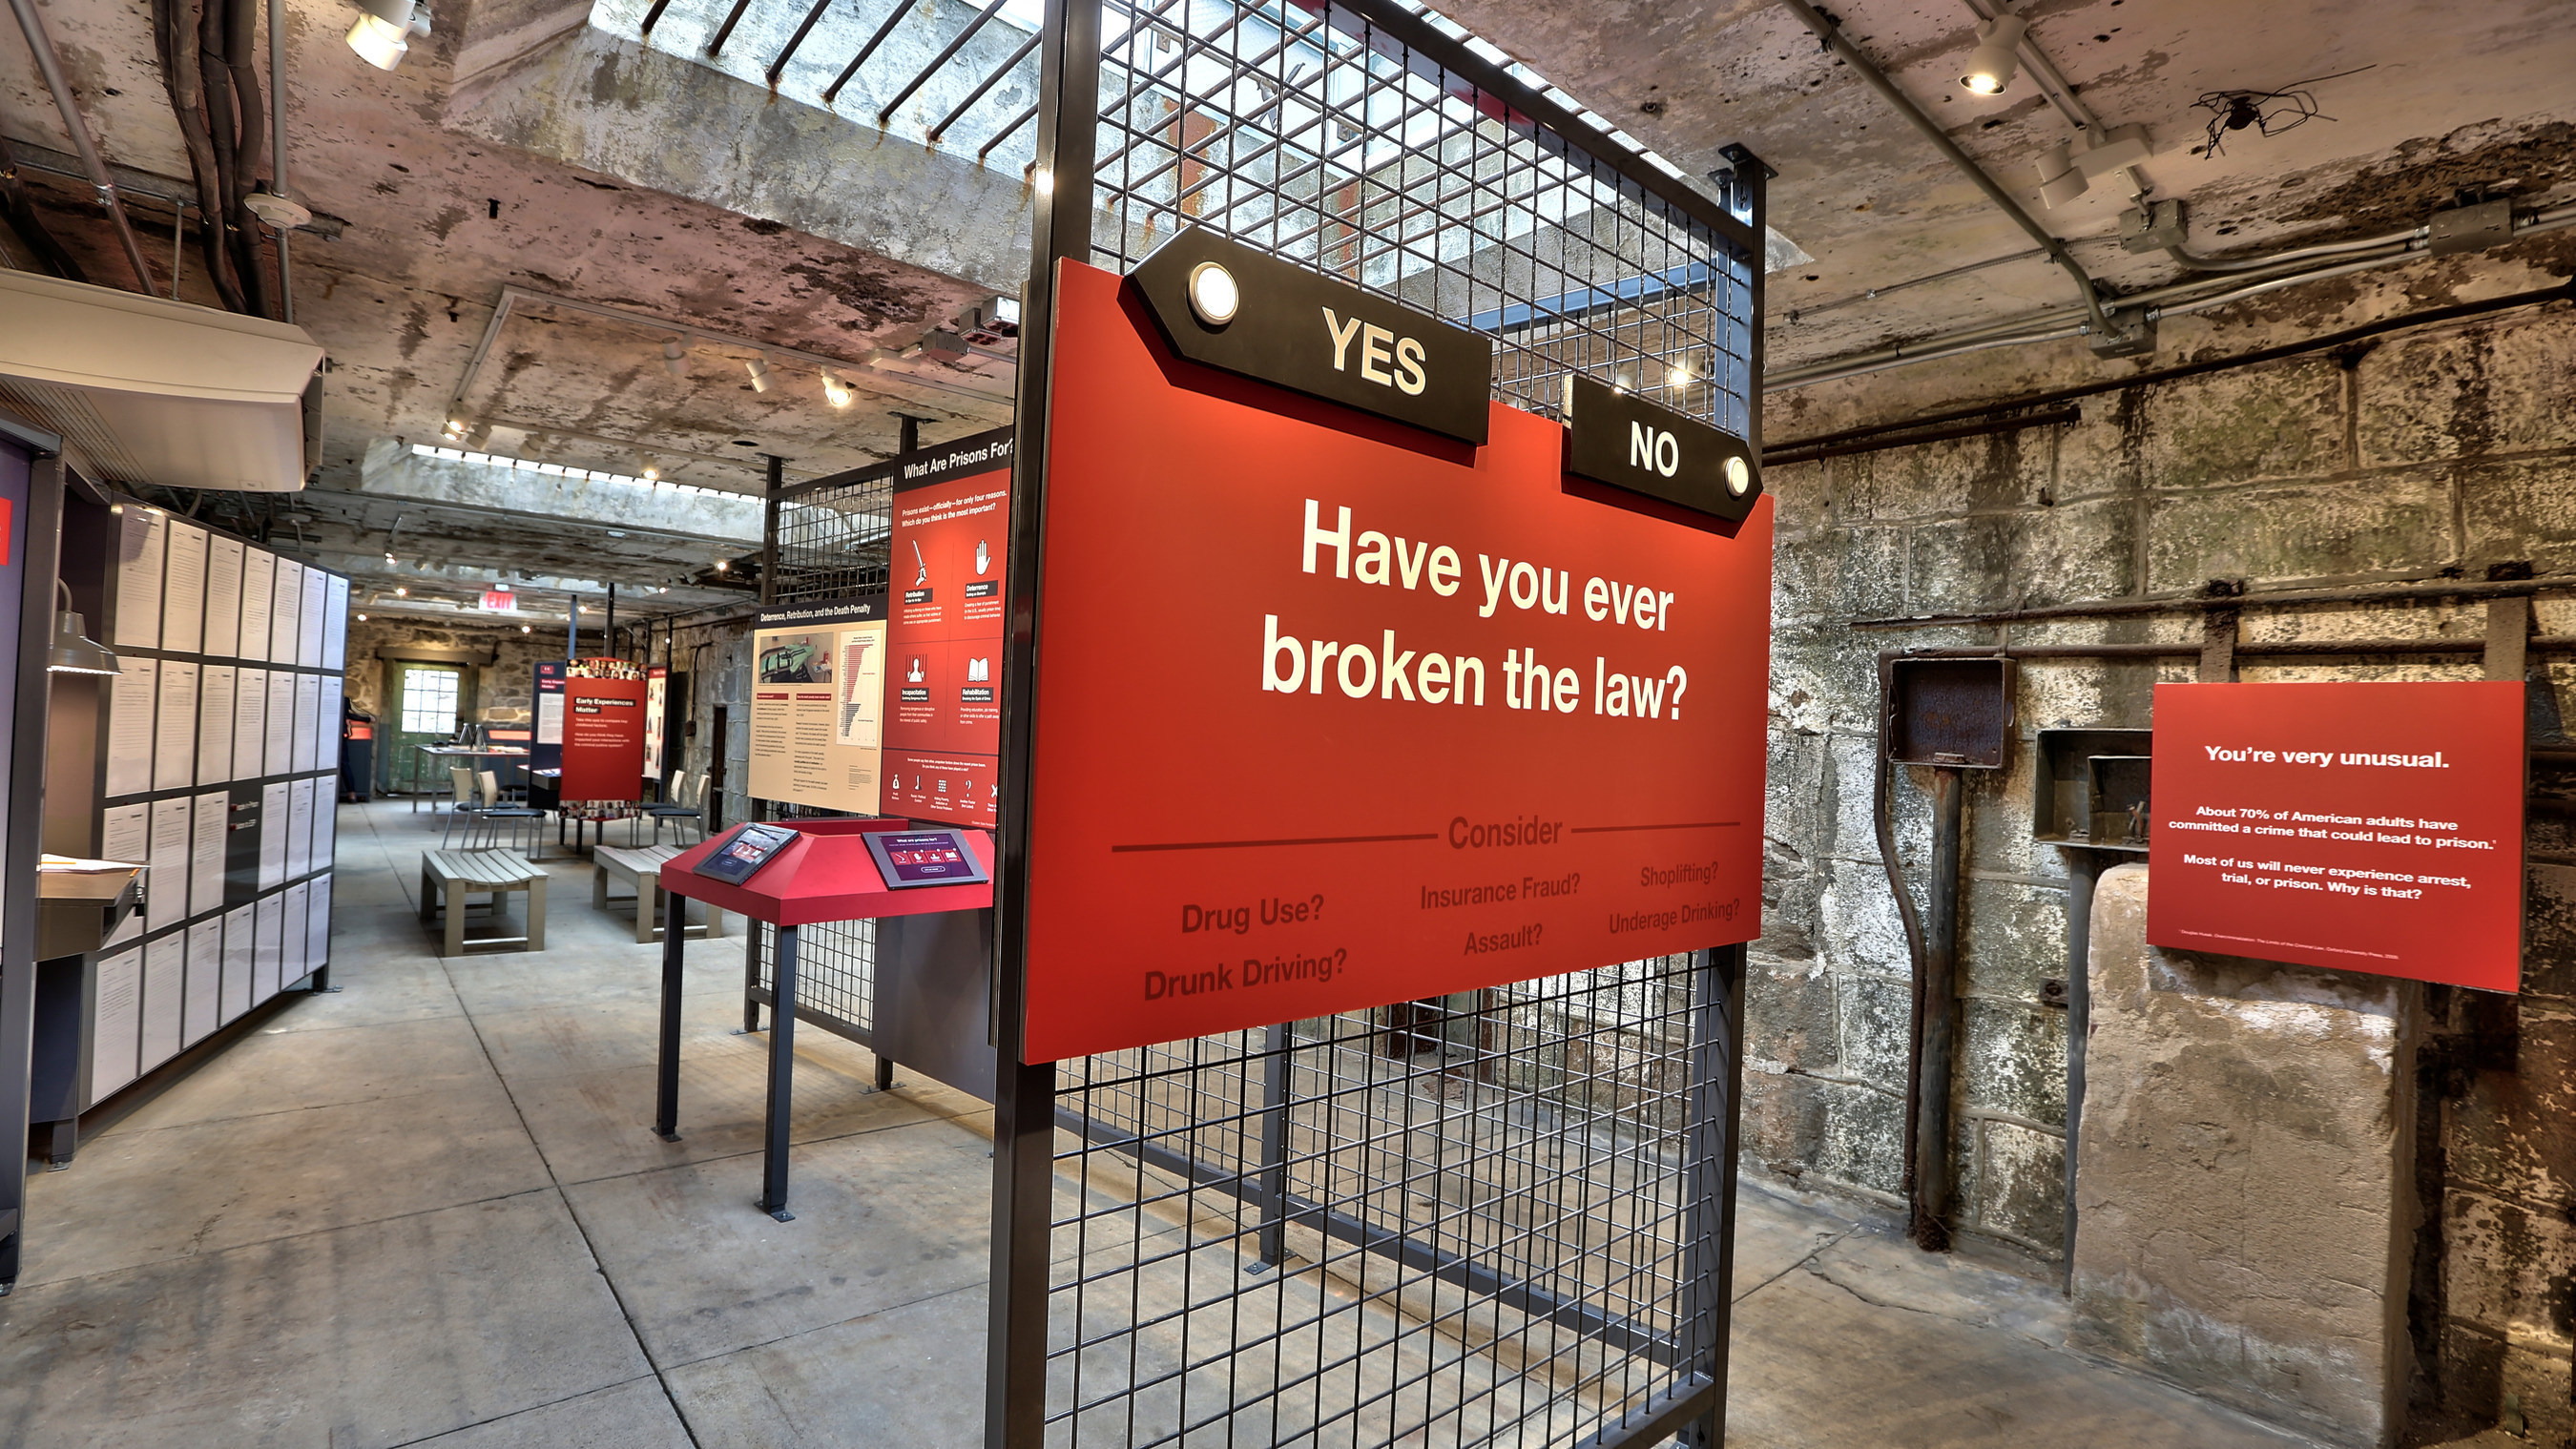 "Prisons Today: Questions in the Age of Mass Incarceration" challenges visitors to reexamine their notions about the role and effectiveness of prisons in America. This groundbreaking new exhibit at Eastern State Penitentiary in Philadelphia, PA, is the first major museum exhibit to tackle this subject matter. Photo by Darryl Moran